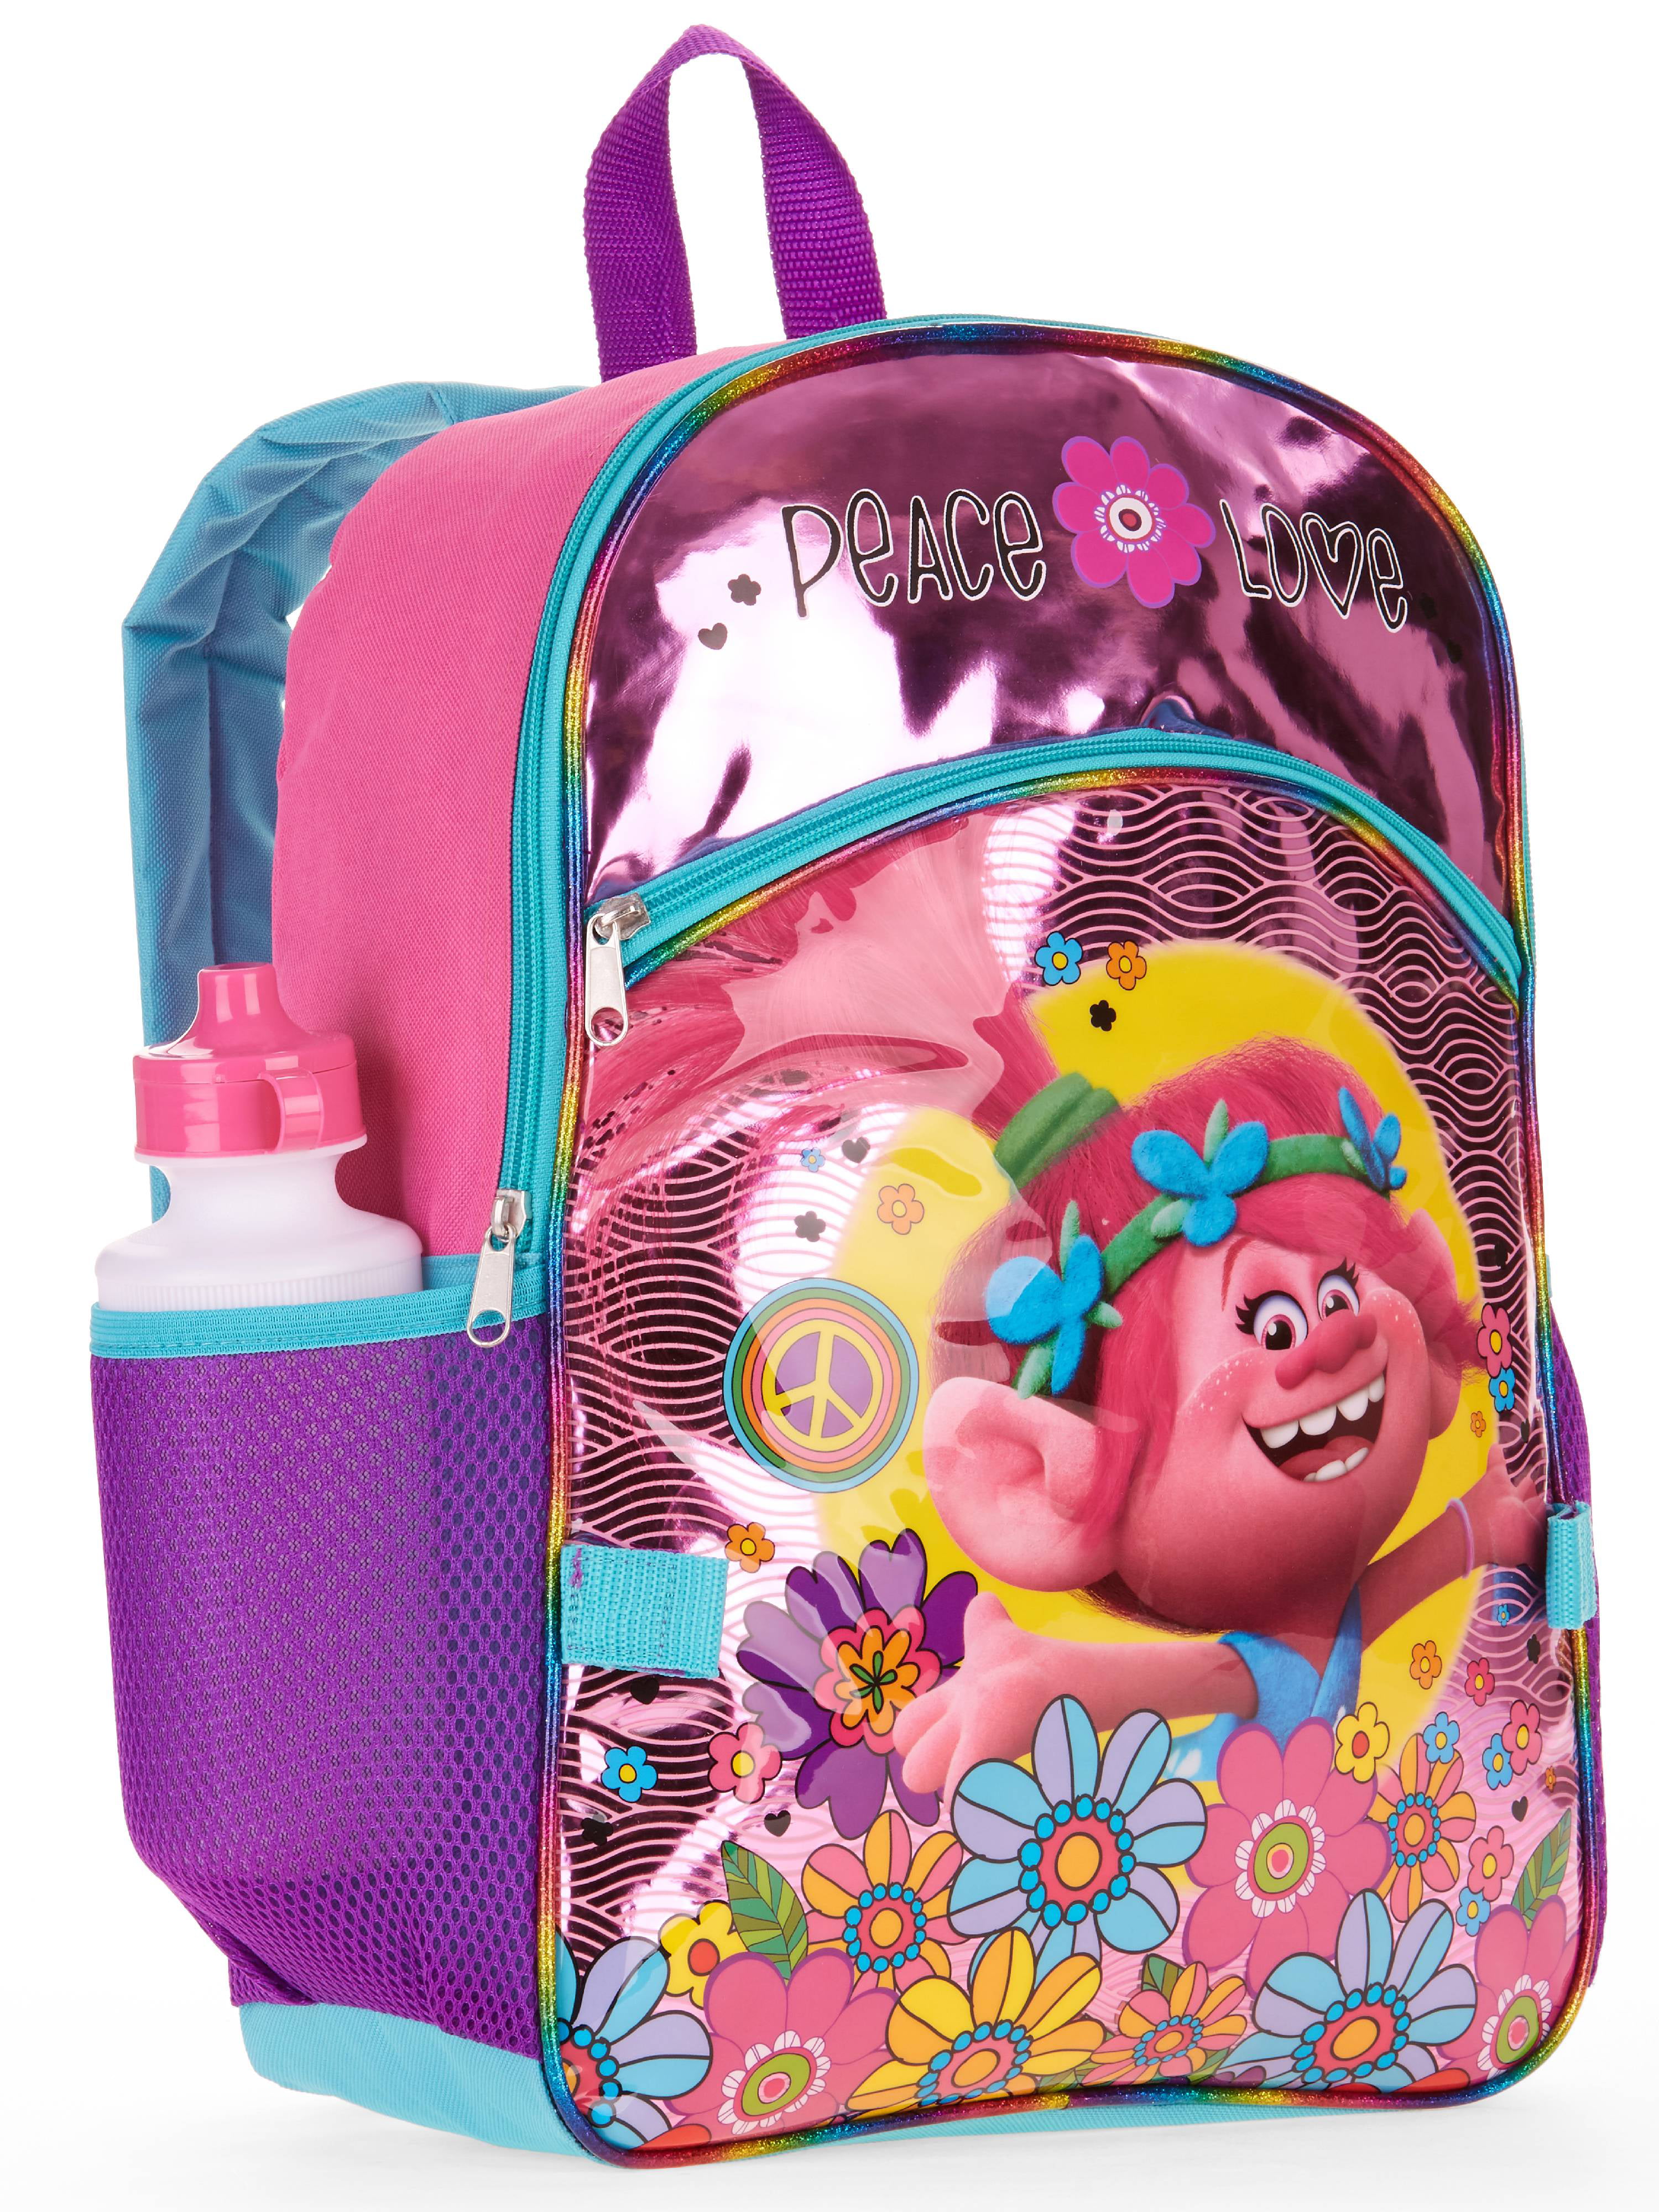 Dreamworks, Accessories, Pink Trolls 4piece Backpack Set Lunchbox Pencil  Case Carabiner Nwt Lh455